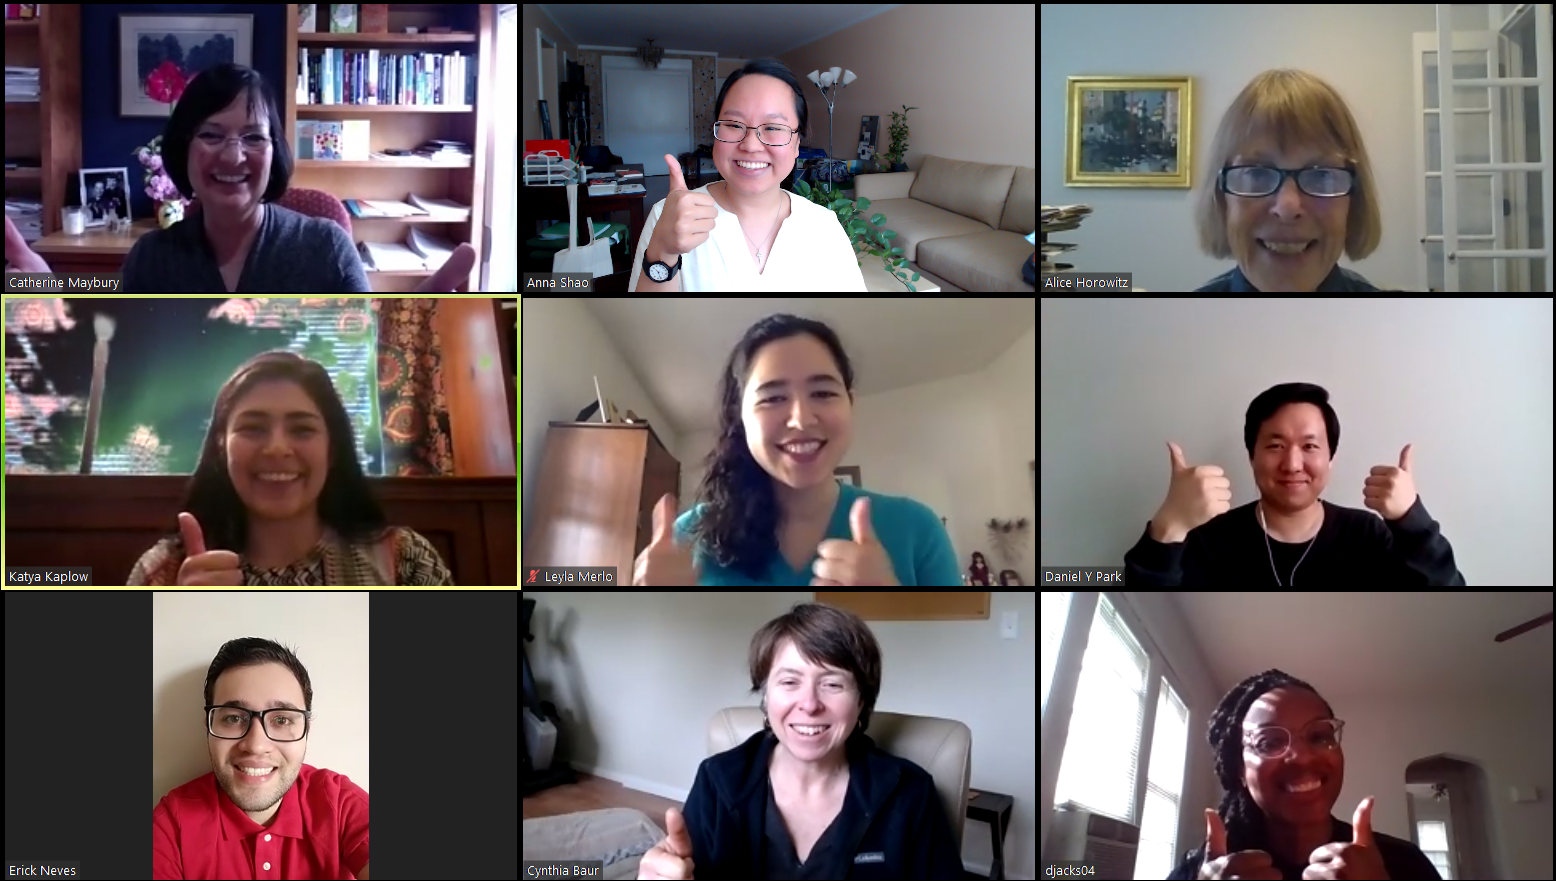 A zoom call with nine people smiling and giving the "thumbs-up" sign.